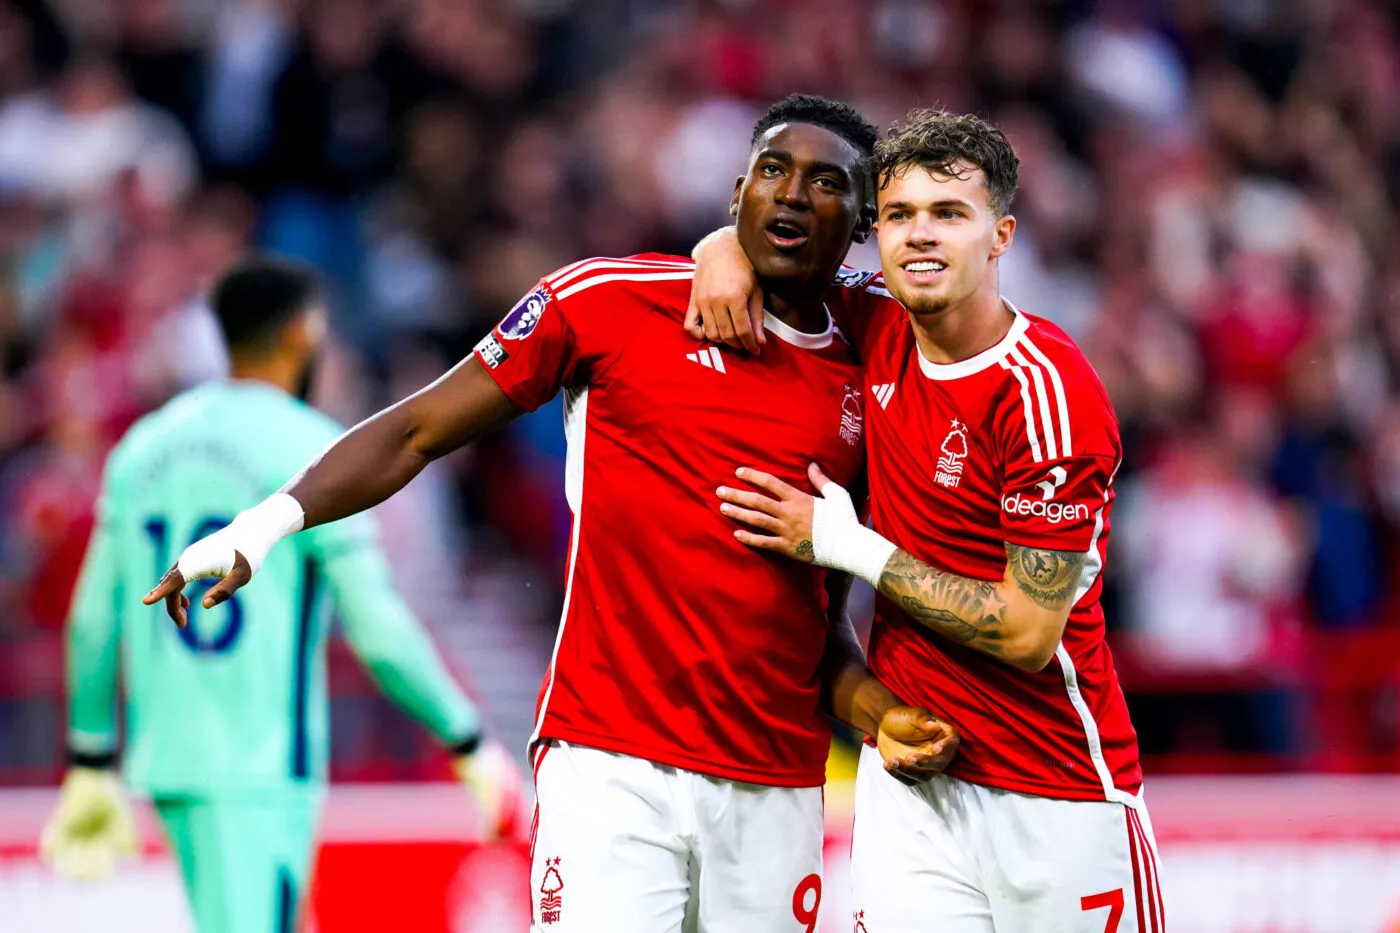 Nottingham Forest's Taiwo Awoniyi (left) celebrates with team-mate Neco Williams after scoring their side's first goal of the game during the Premier League match at the City Ground, Nottingham. Picture date: Friday August 18, 2023. - Photo by Icon sport